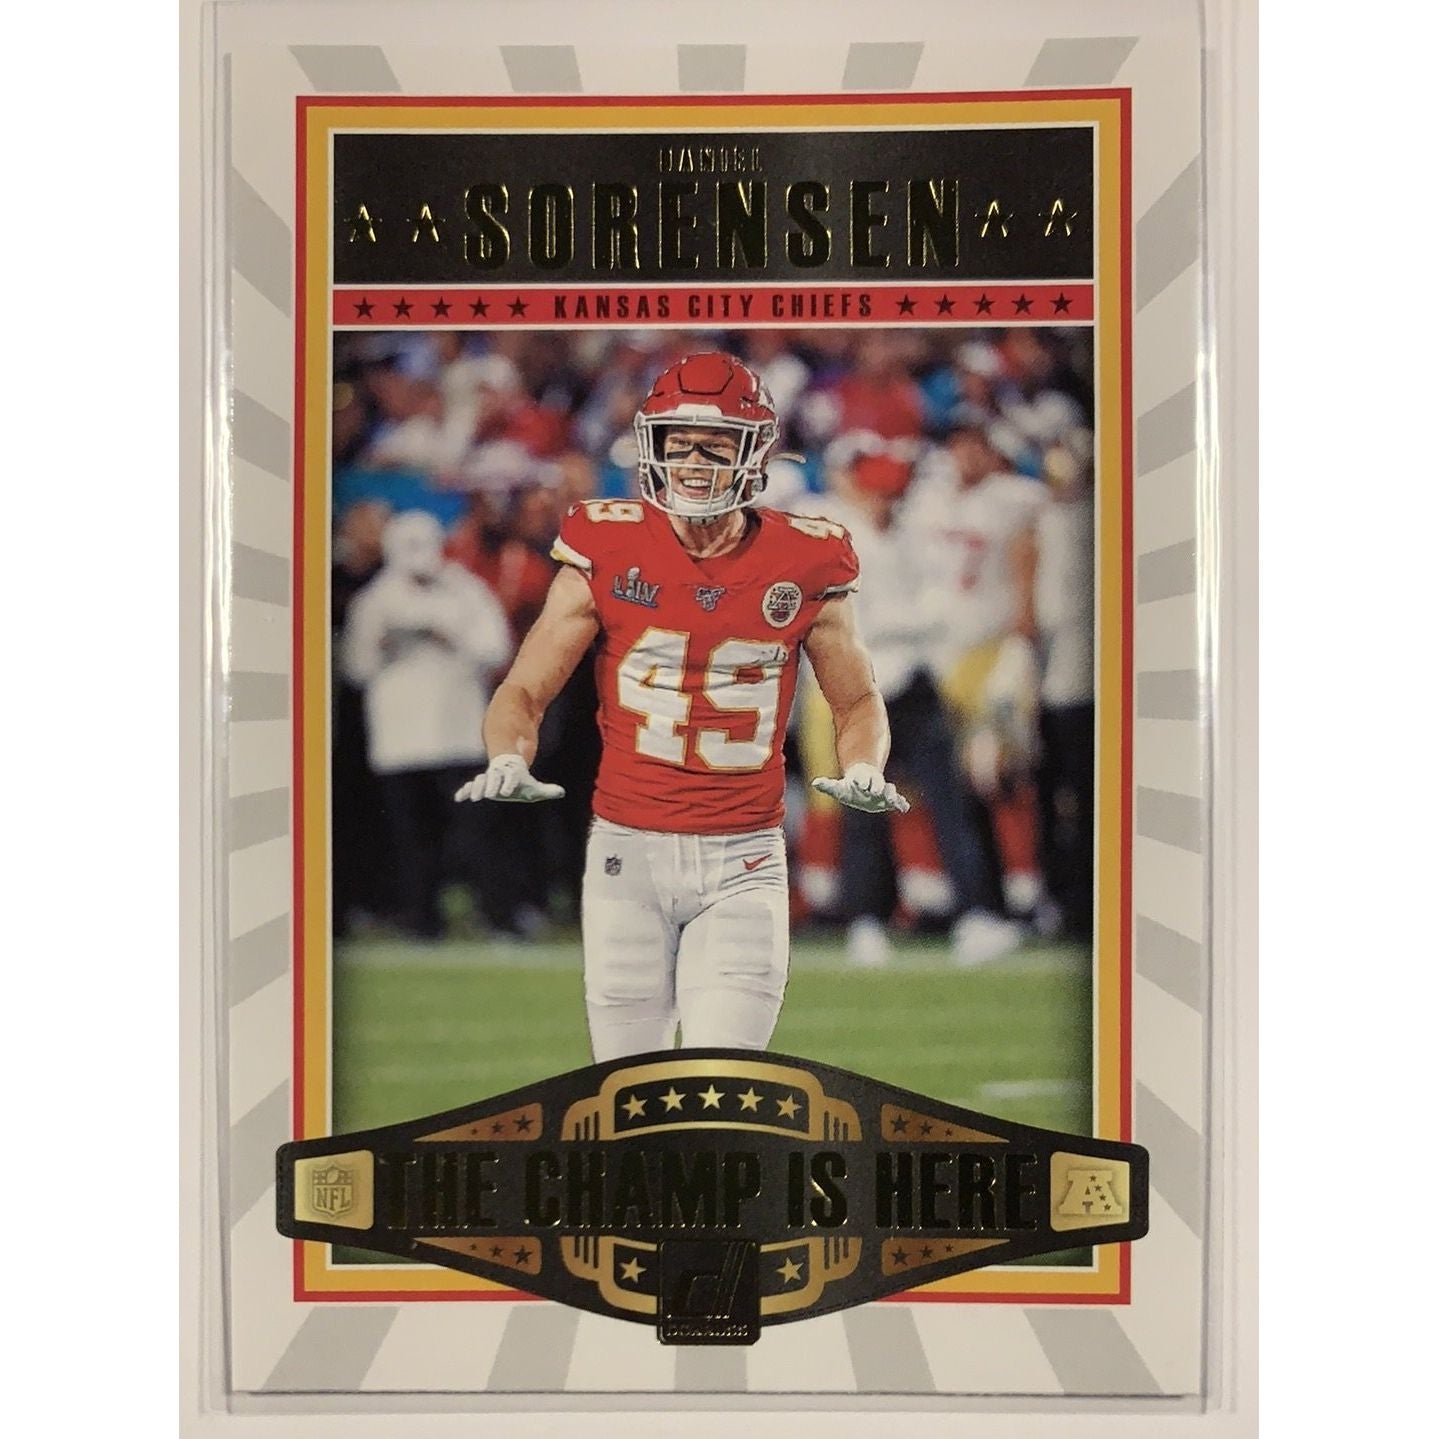  2020 Donruss Daniel Sorensen The Champ Is Here  Local Legends Cards & Collectibles